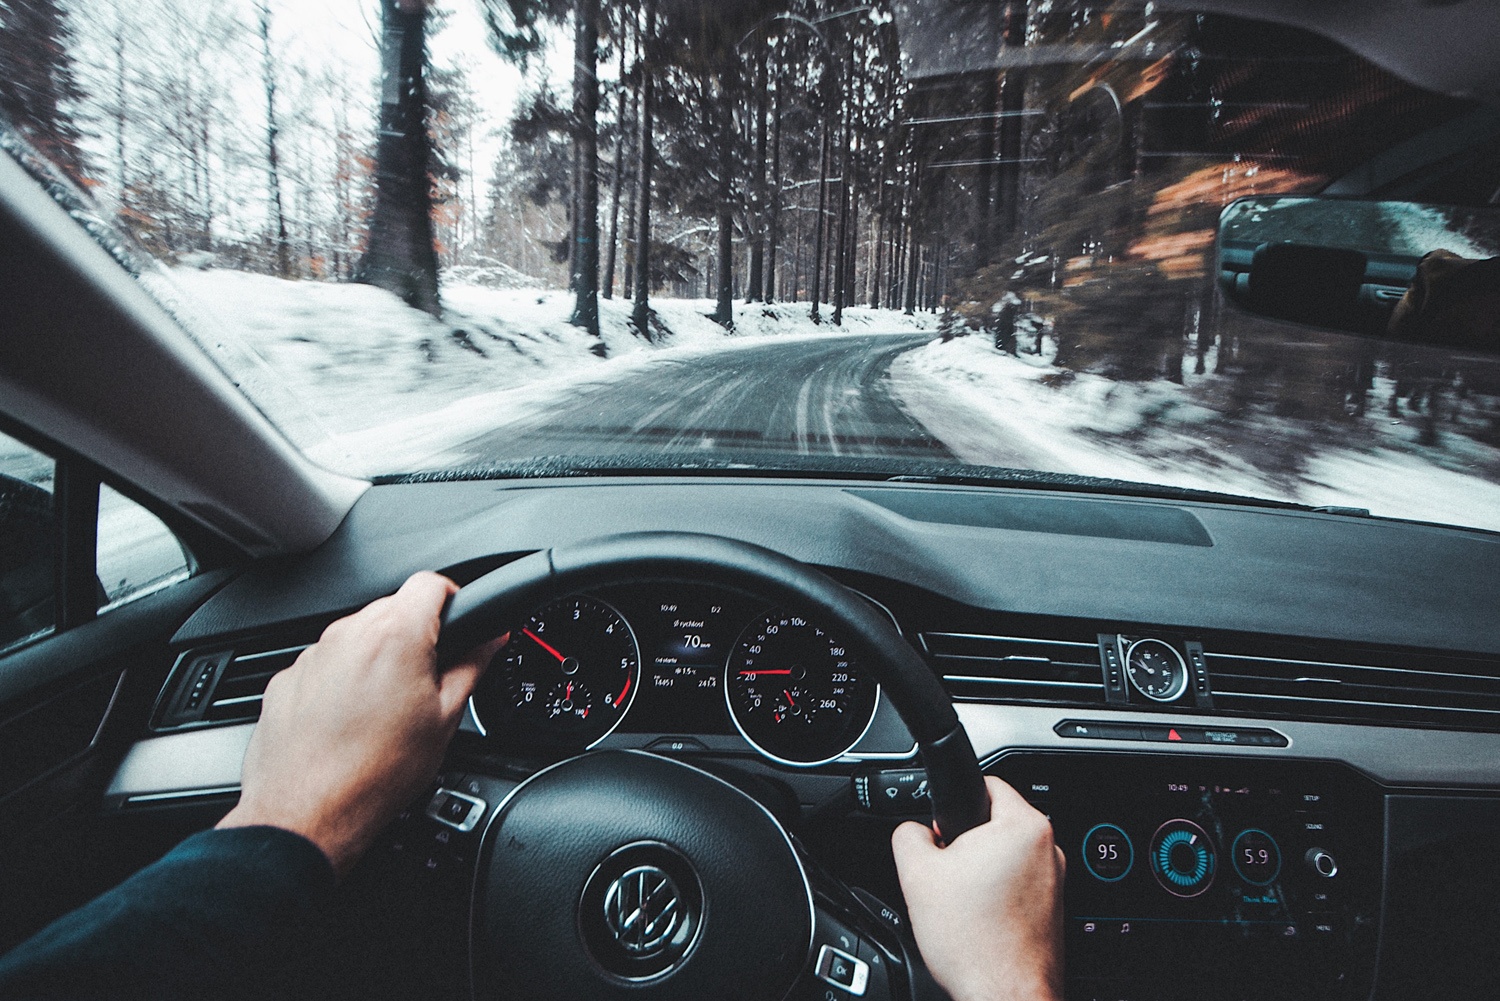 It's good to know car insurance coverage types when driving on icy roads